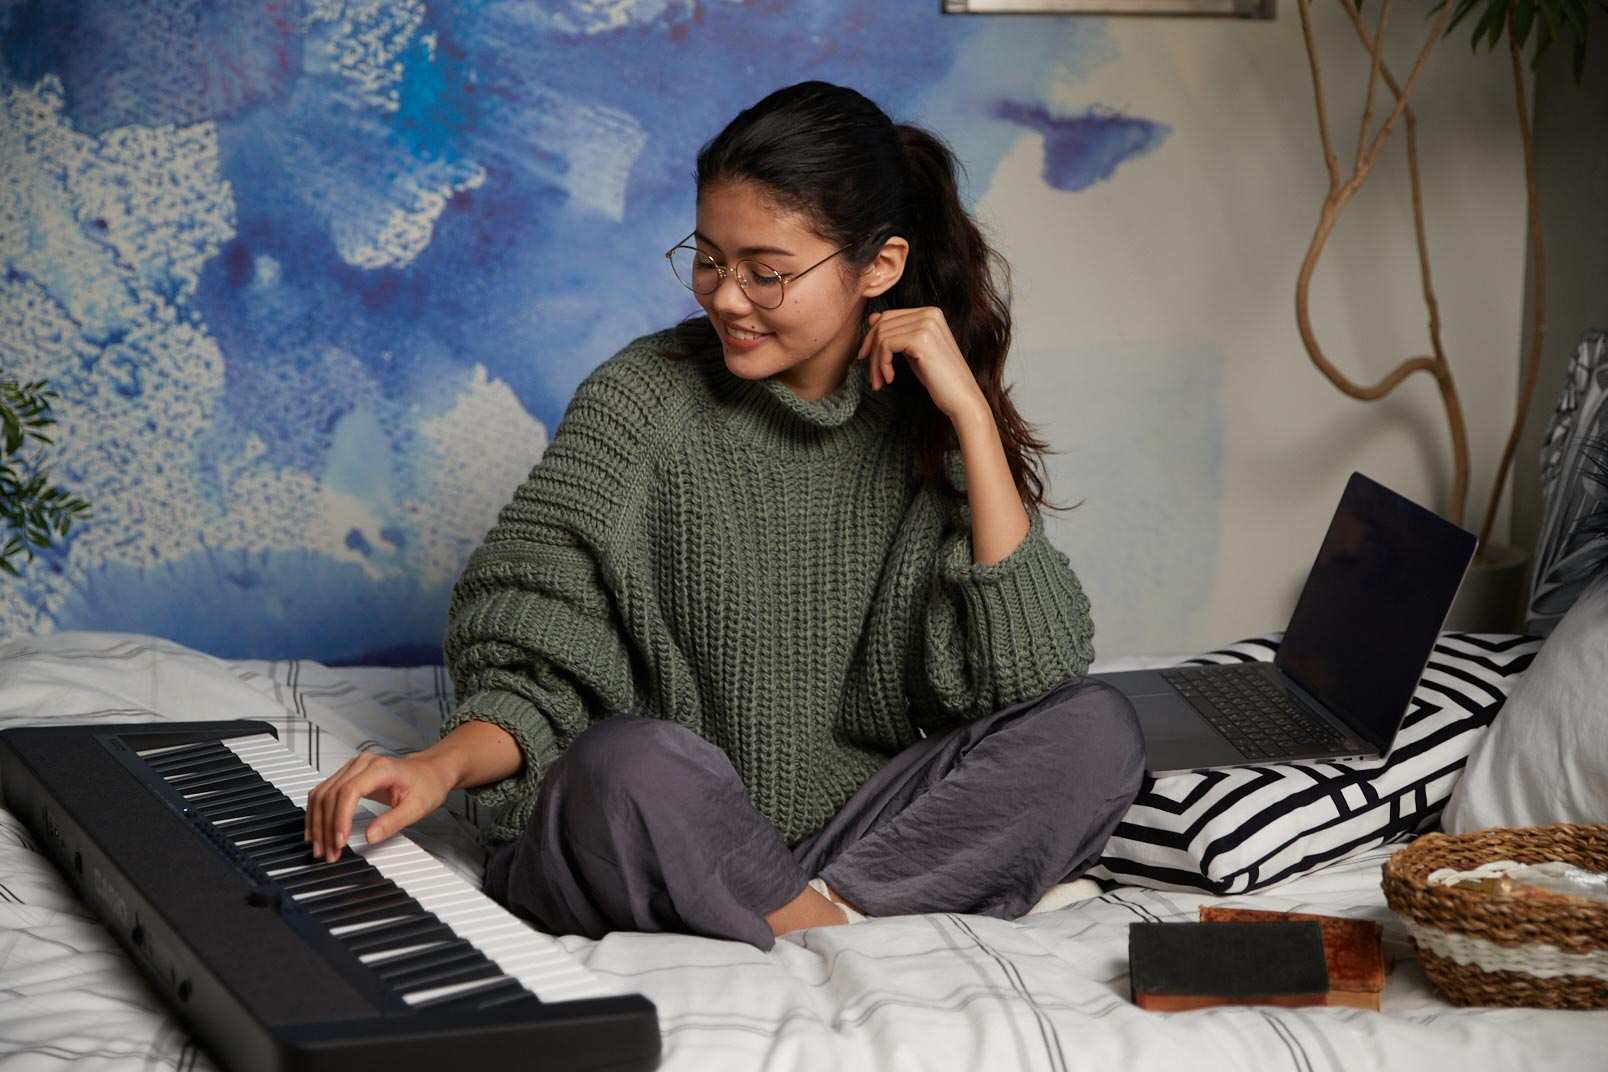 Girl Playing Casio Keyboard on Bed with laptop